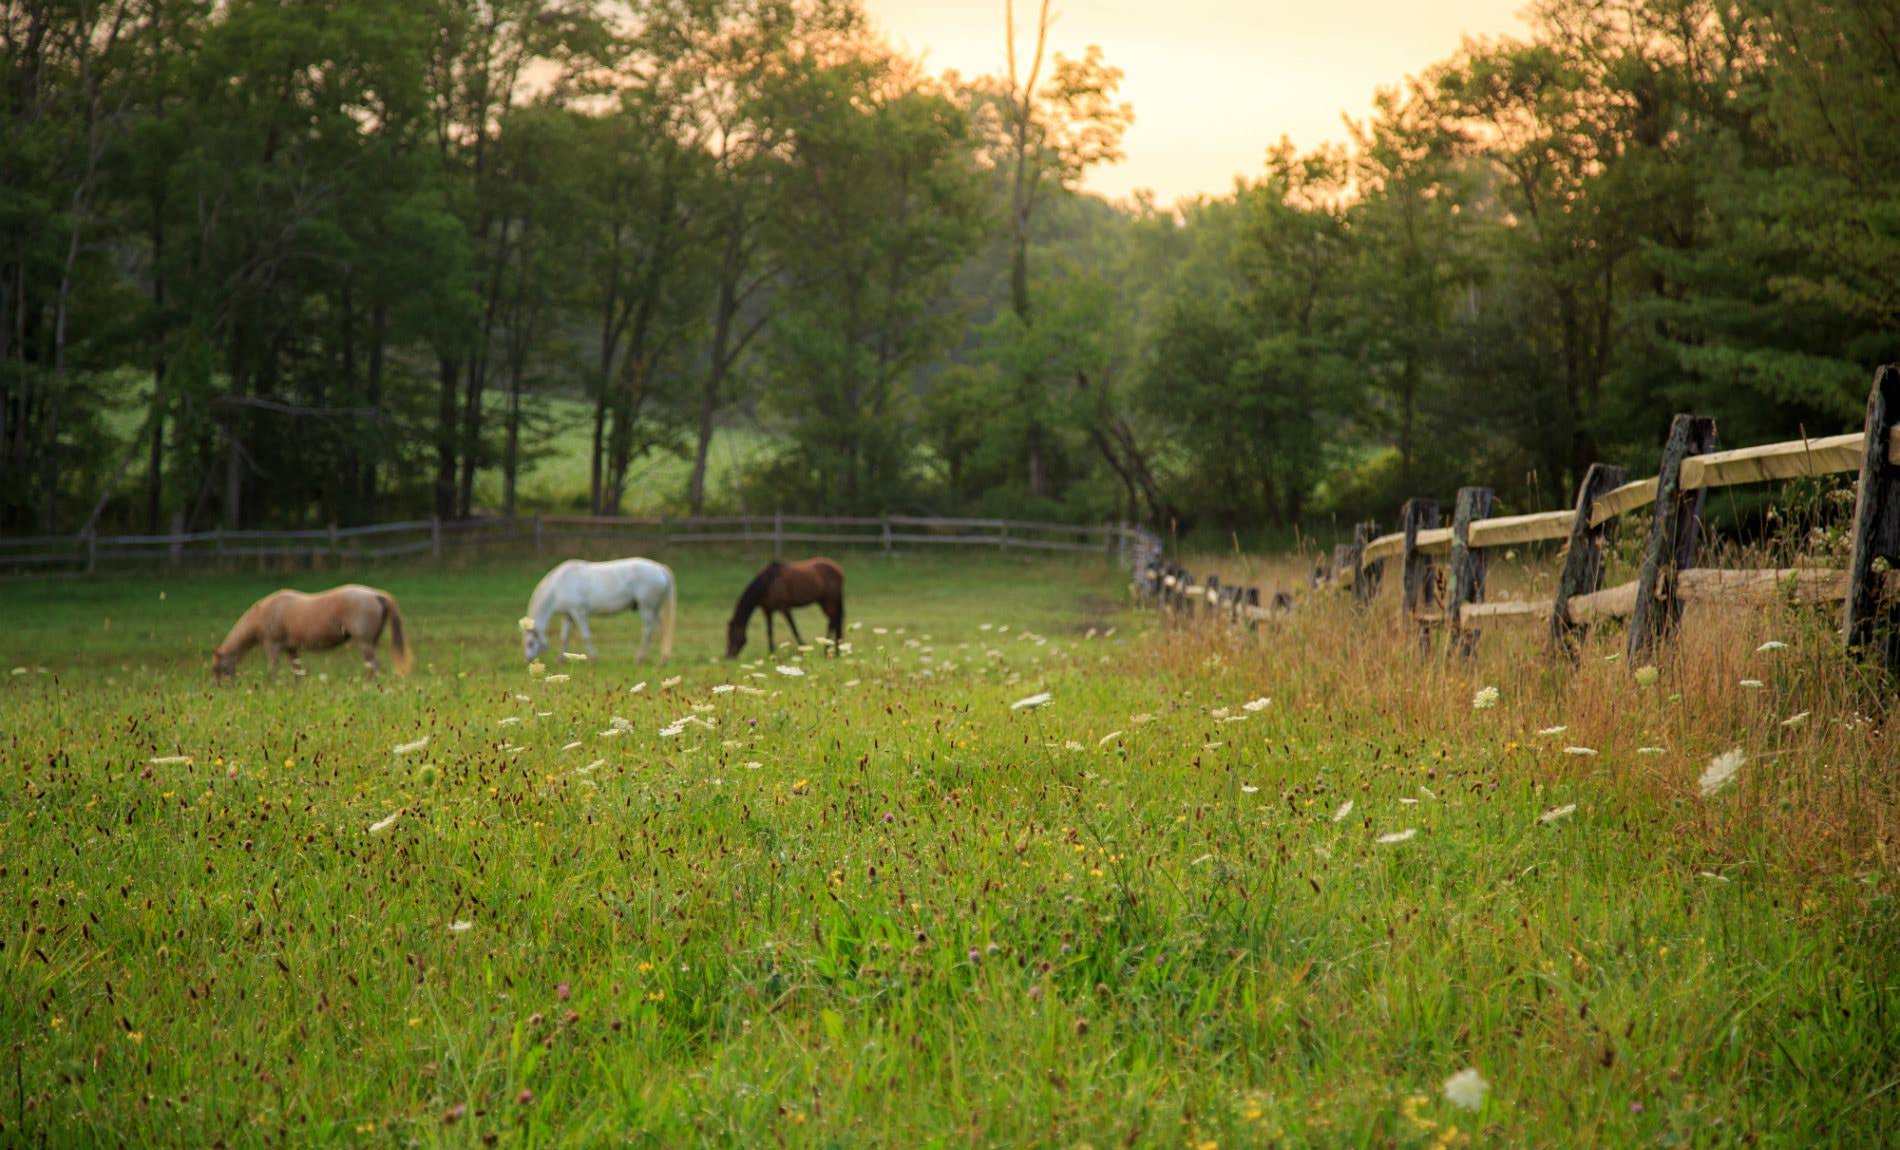 Three horses in a green pasture surrounded by a split-rail fence and trees